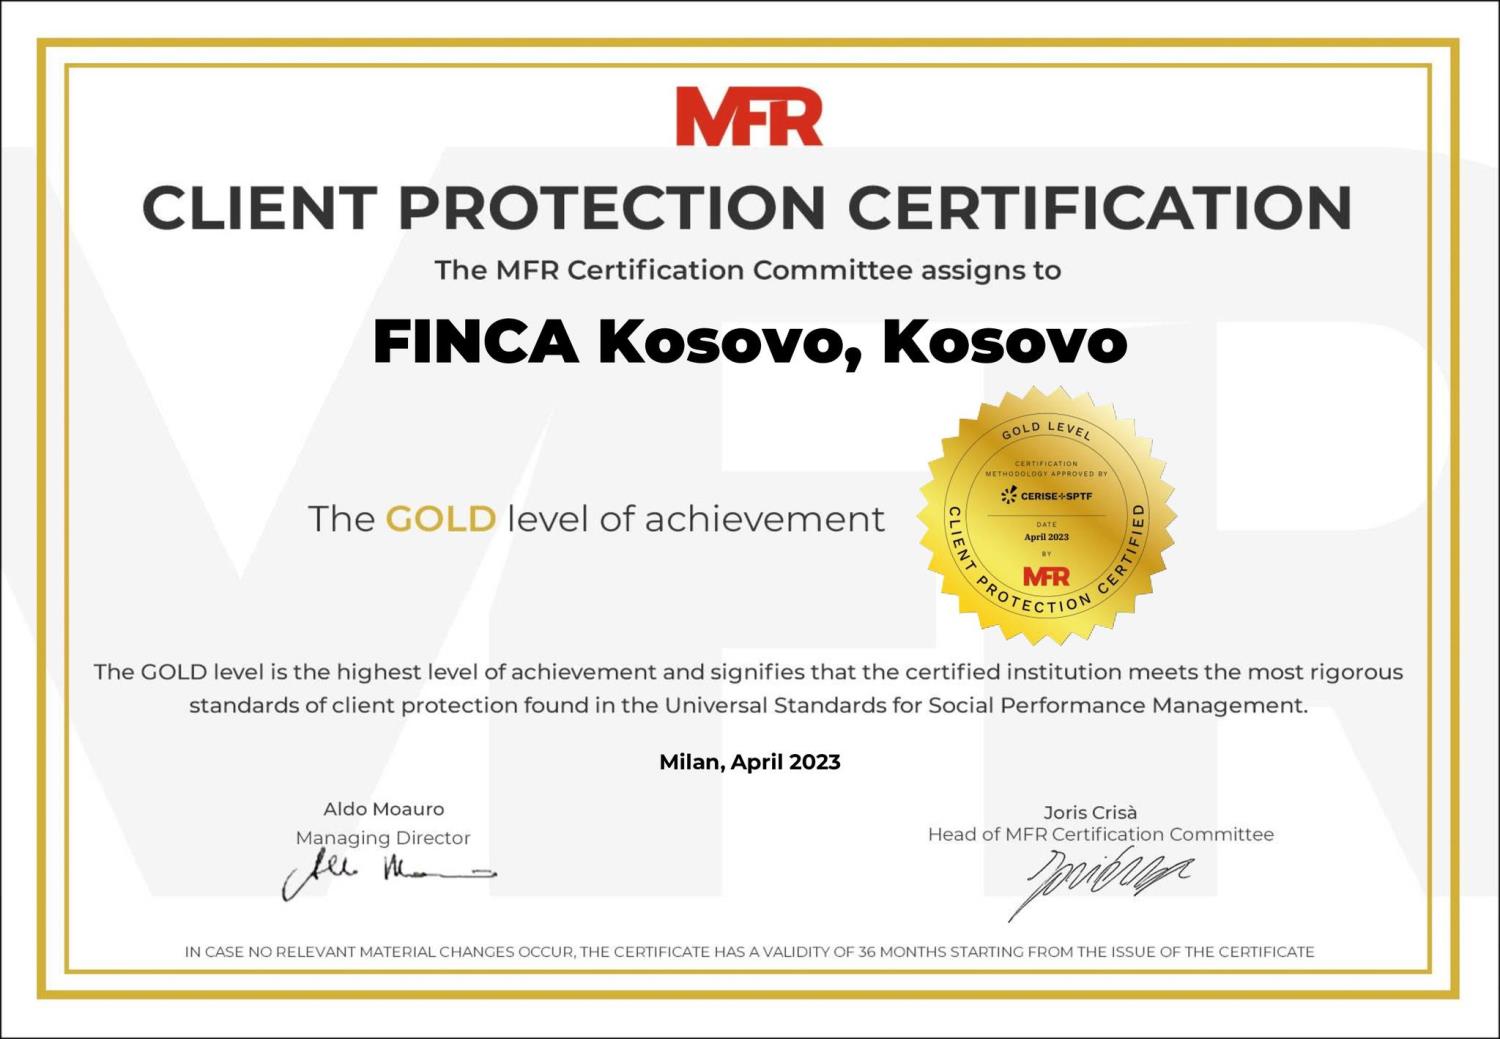 FINCA Kosovo is certified with the highest level for "Client Protection" by MFR